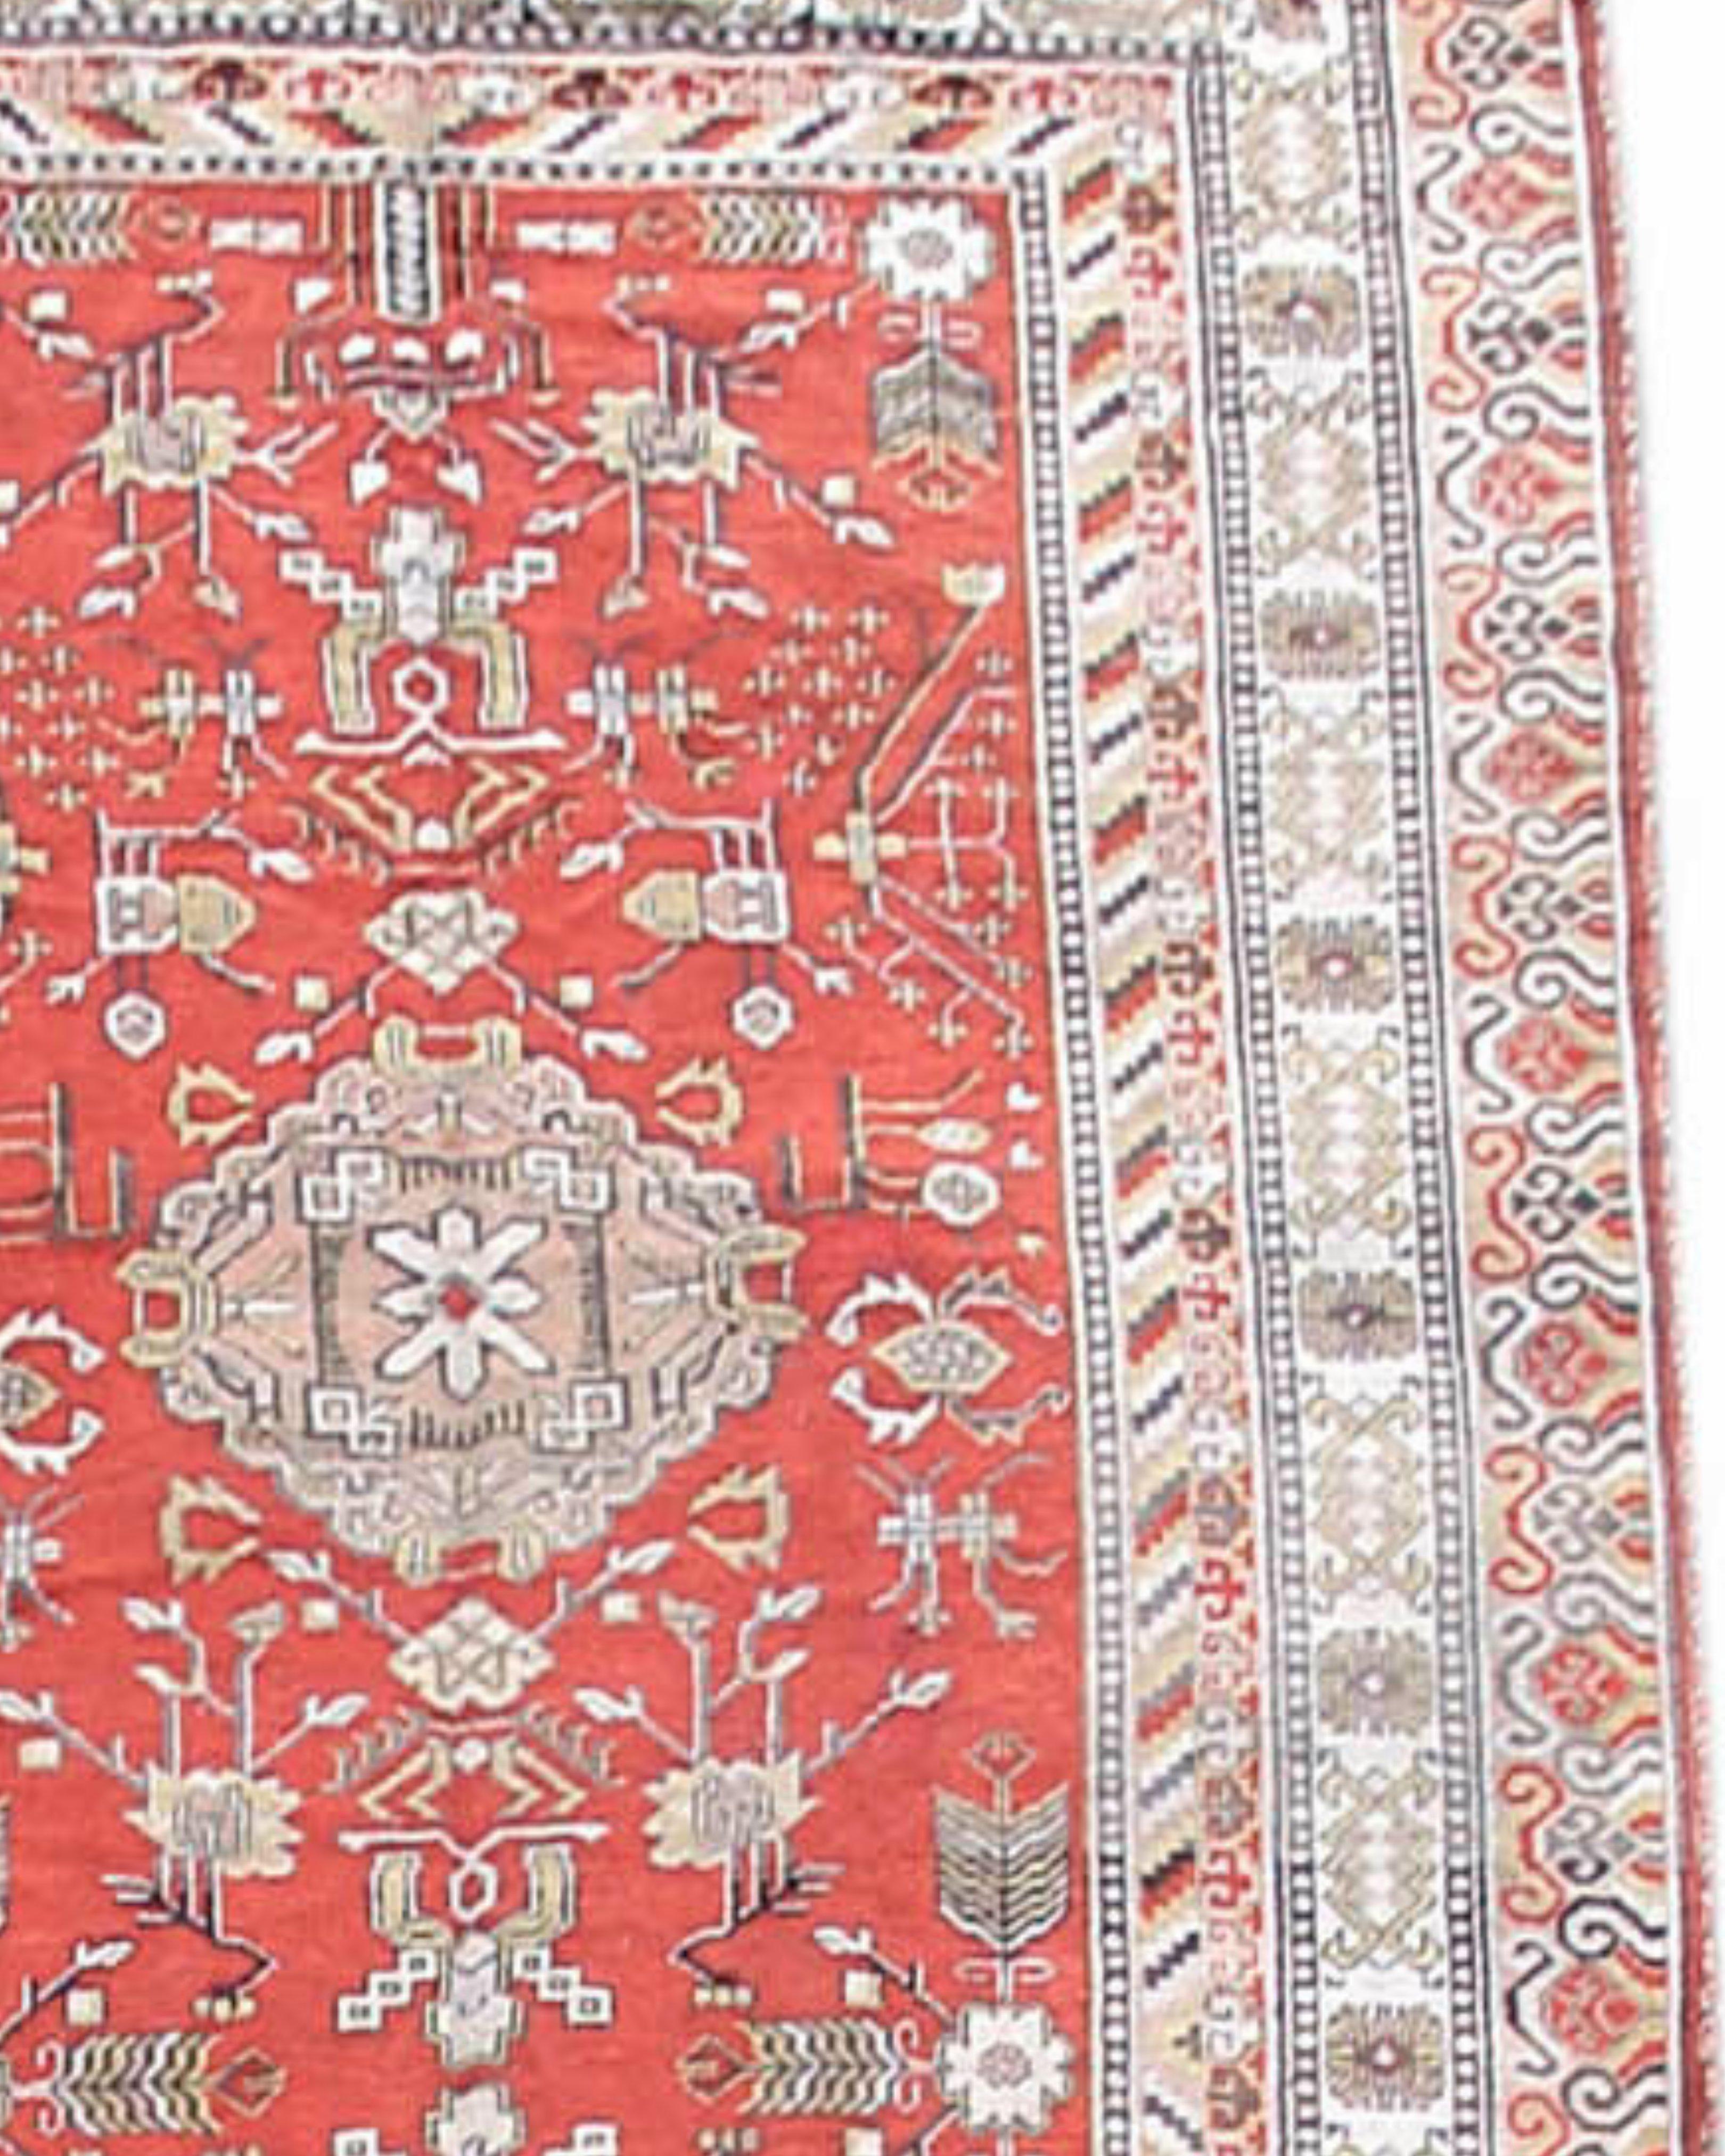 Antique Khotan Rug, Early 20th Century

Additional Information:
Dimensions: 6'7